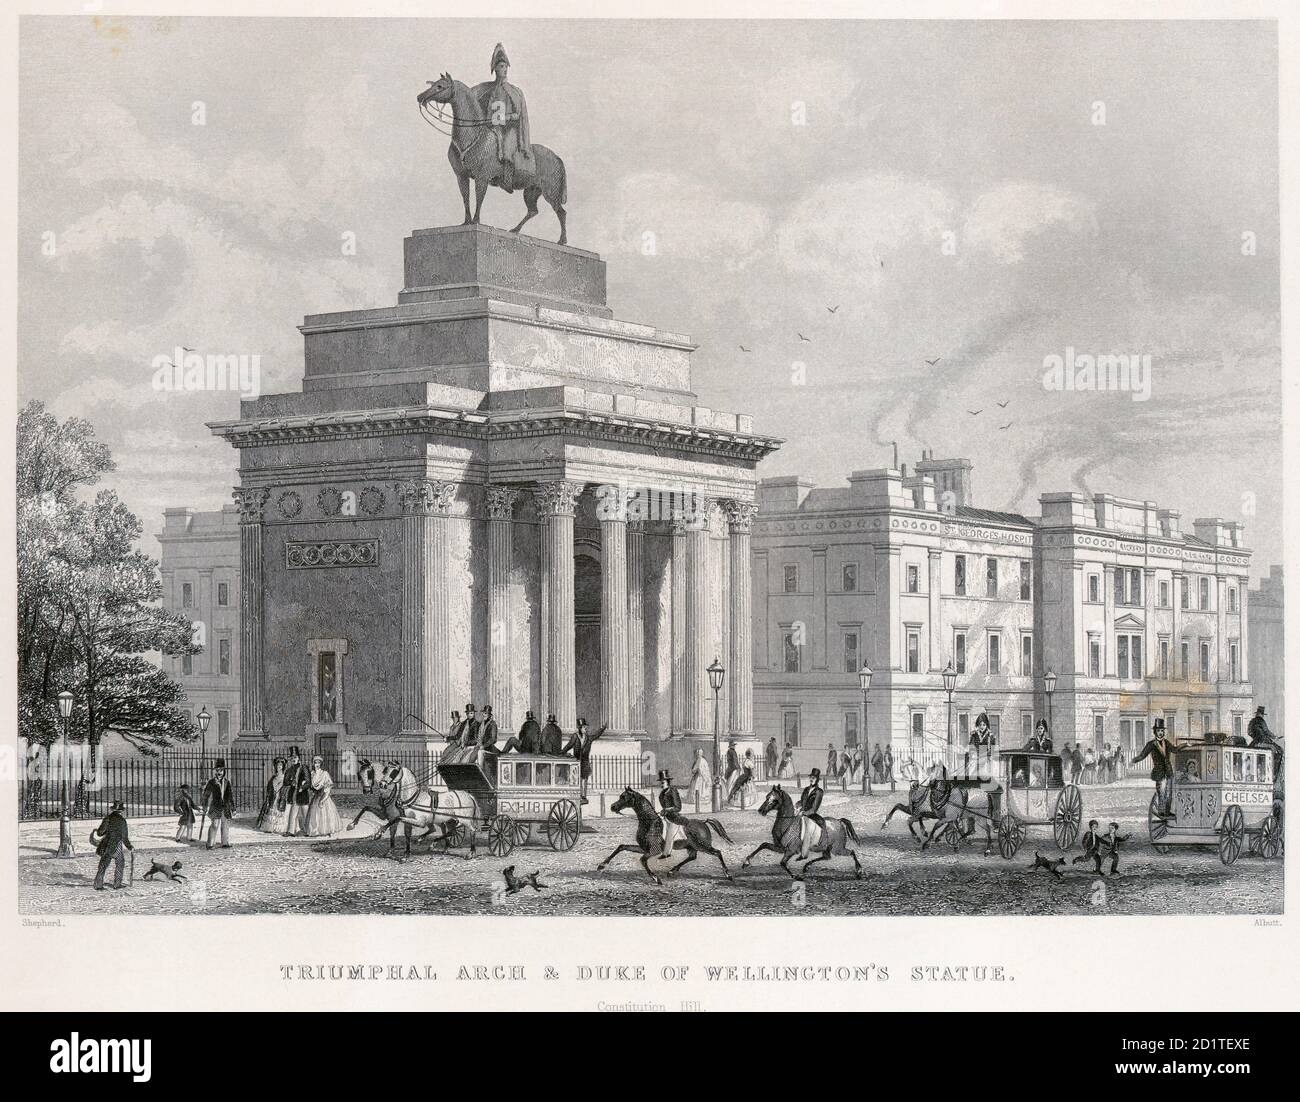 APSLEY HOUSE and WELLINGTON ARCH, Piccadilly, Hyde Park Corner, Westminster, London.  'Triumphal Arch and Duke of Wellington's Statue' by T H Shepherd. Published in Shepherd's 'The history of mighty London and its environs' in 1855. Engraving dated 1850. From the Mayson Beeton Collection. Stock Photo